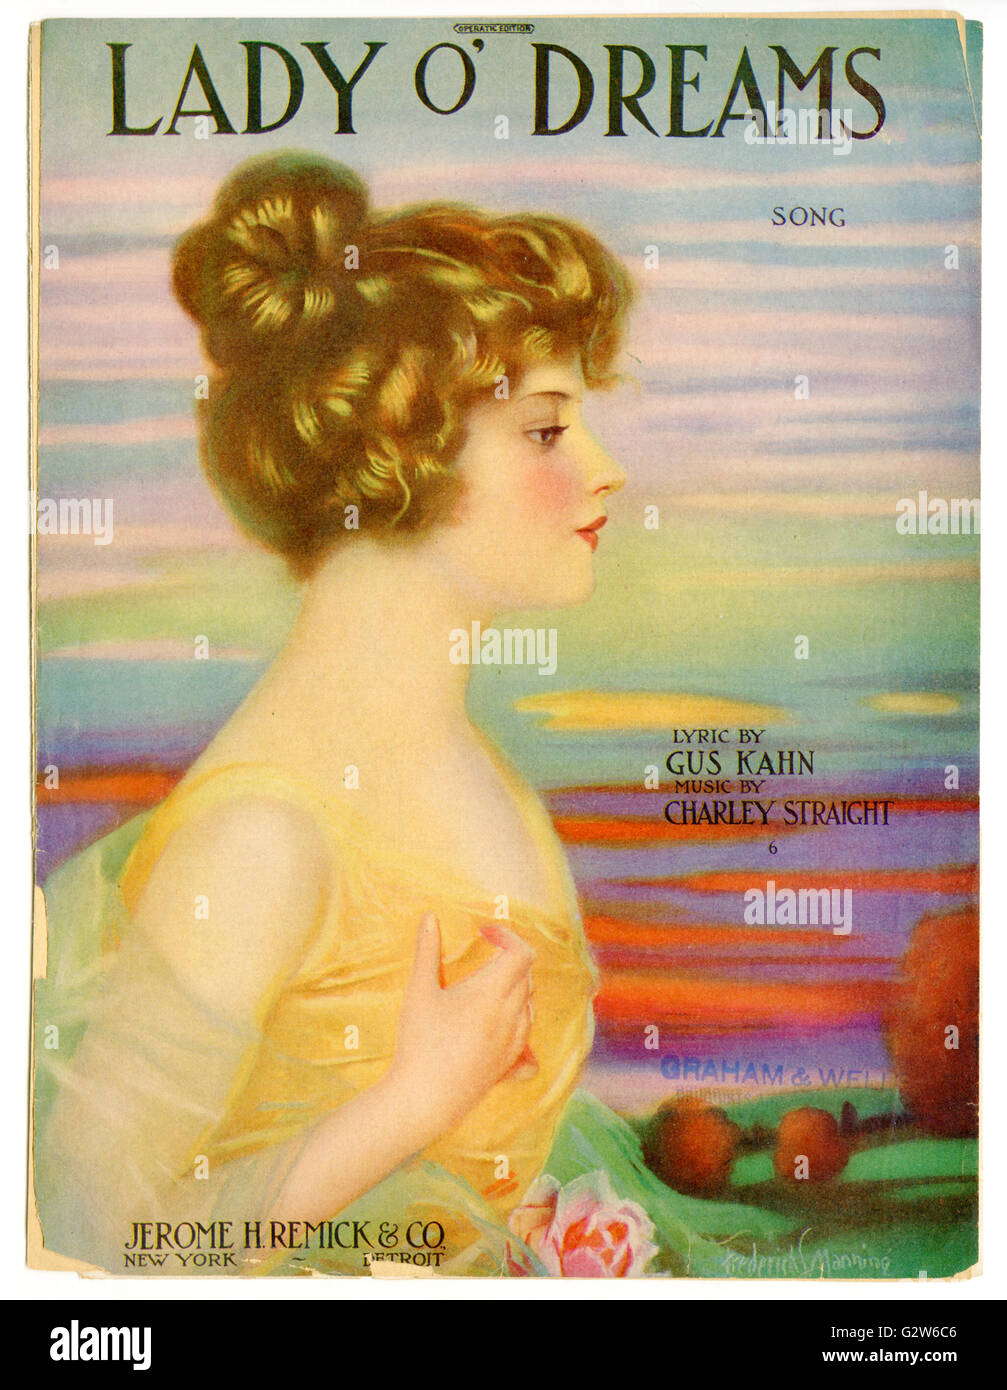 Piano sheet music cover for “Lady o’ Dreams” by Gus Kahn and Charley Straight. Published by Jerome H Remick and Company New York Stock Photo